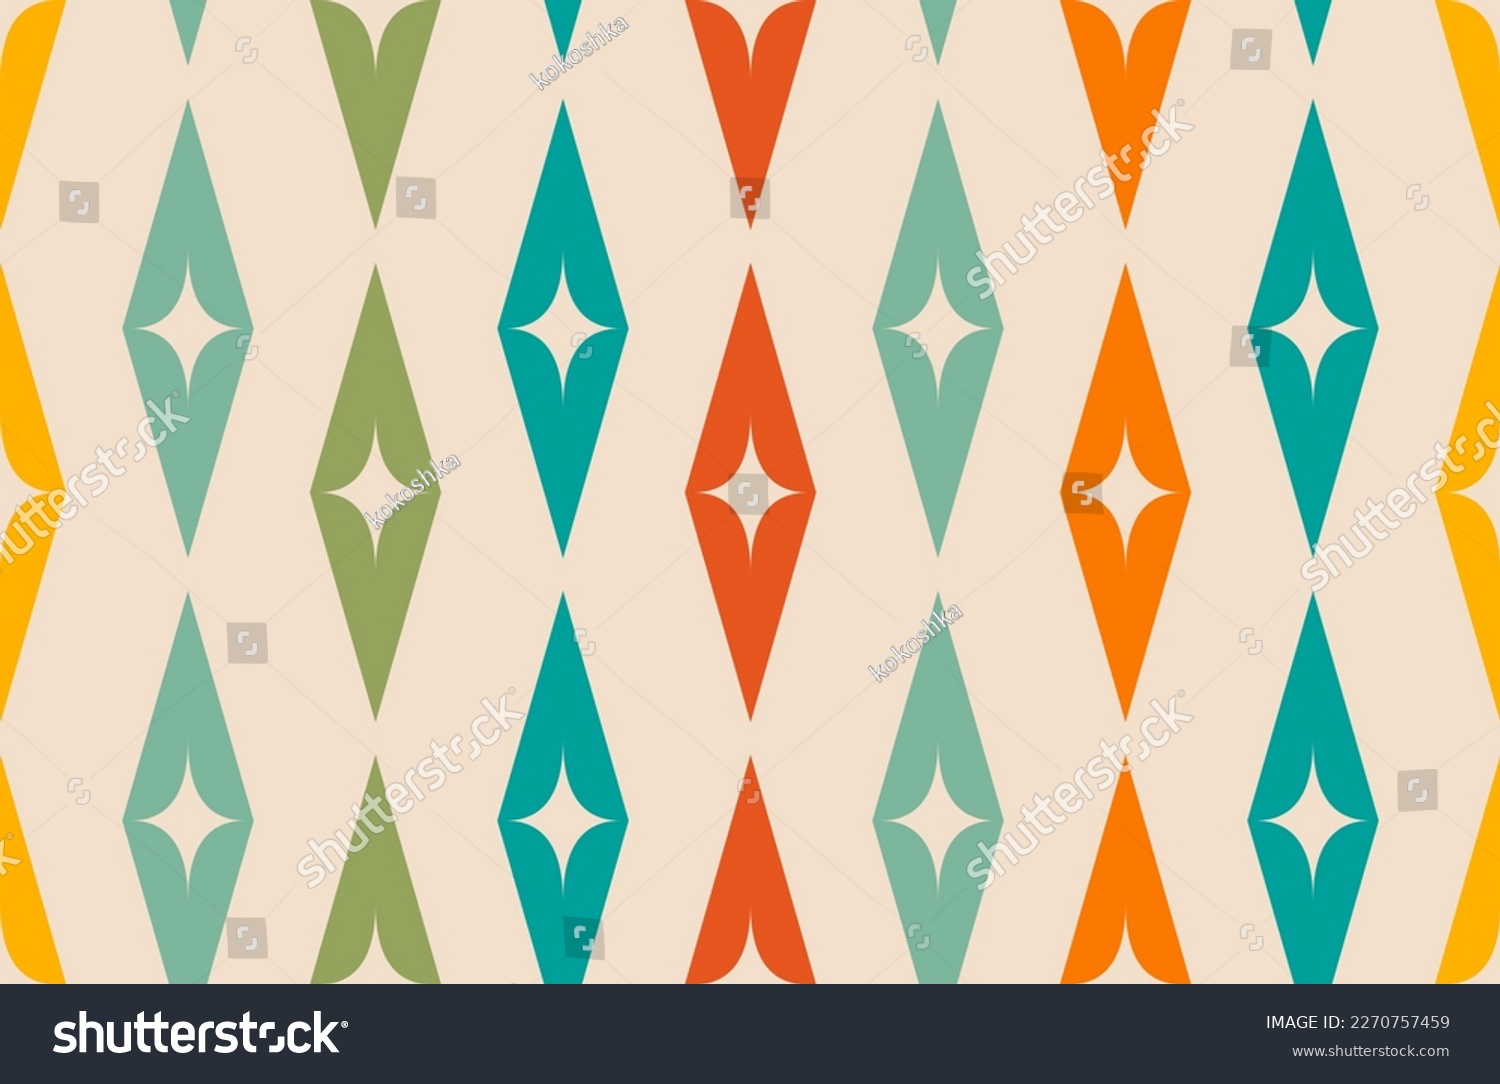 SVG of Mid-century modern atomic age background in teal and orange. Ideal for wallpaper and fabric design. svg